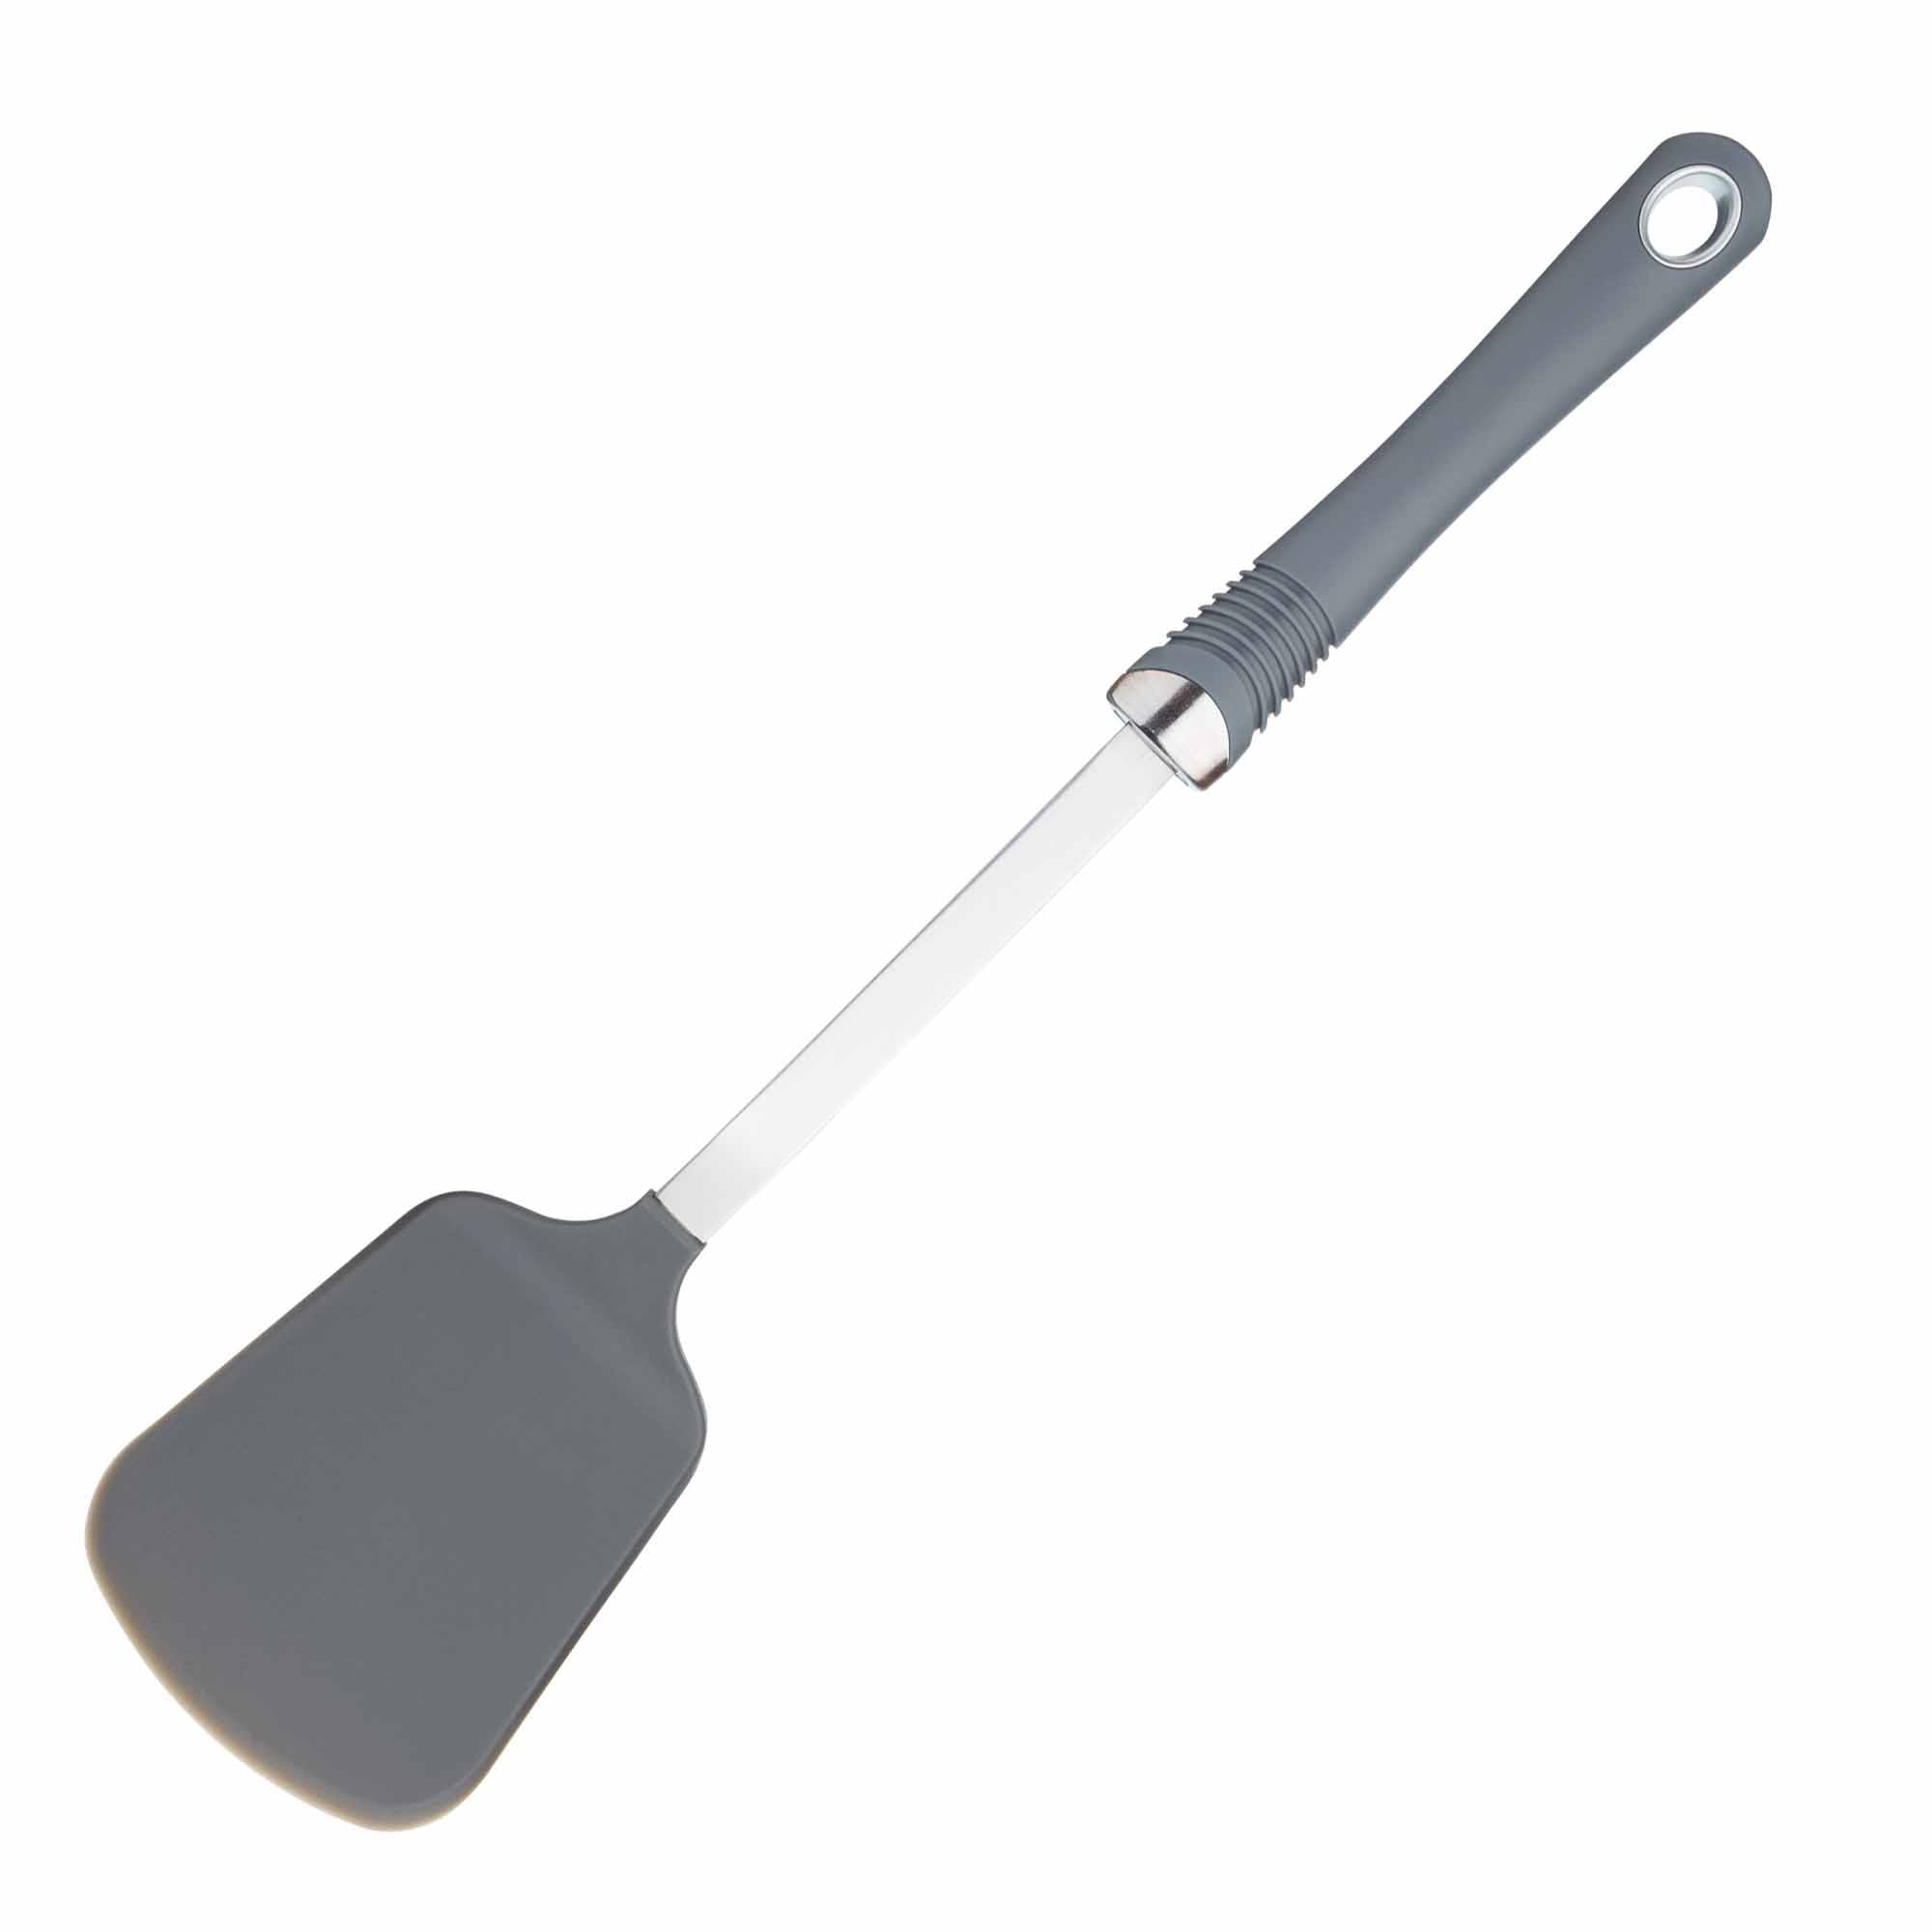 KitchenCraft Professional Solid Nylon Cooking Turner with Soft-Grip Handle - The Cooks Cupboard Ltd